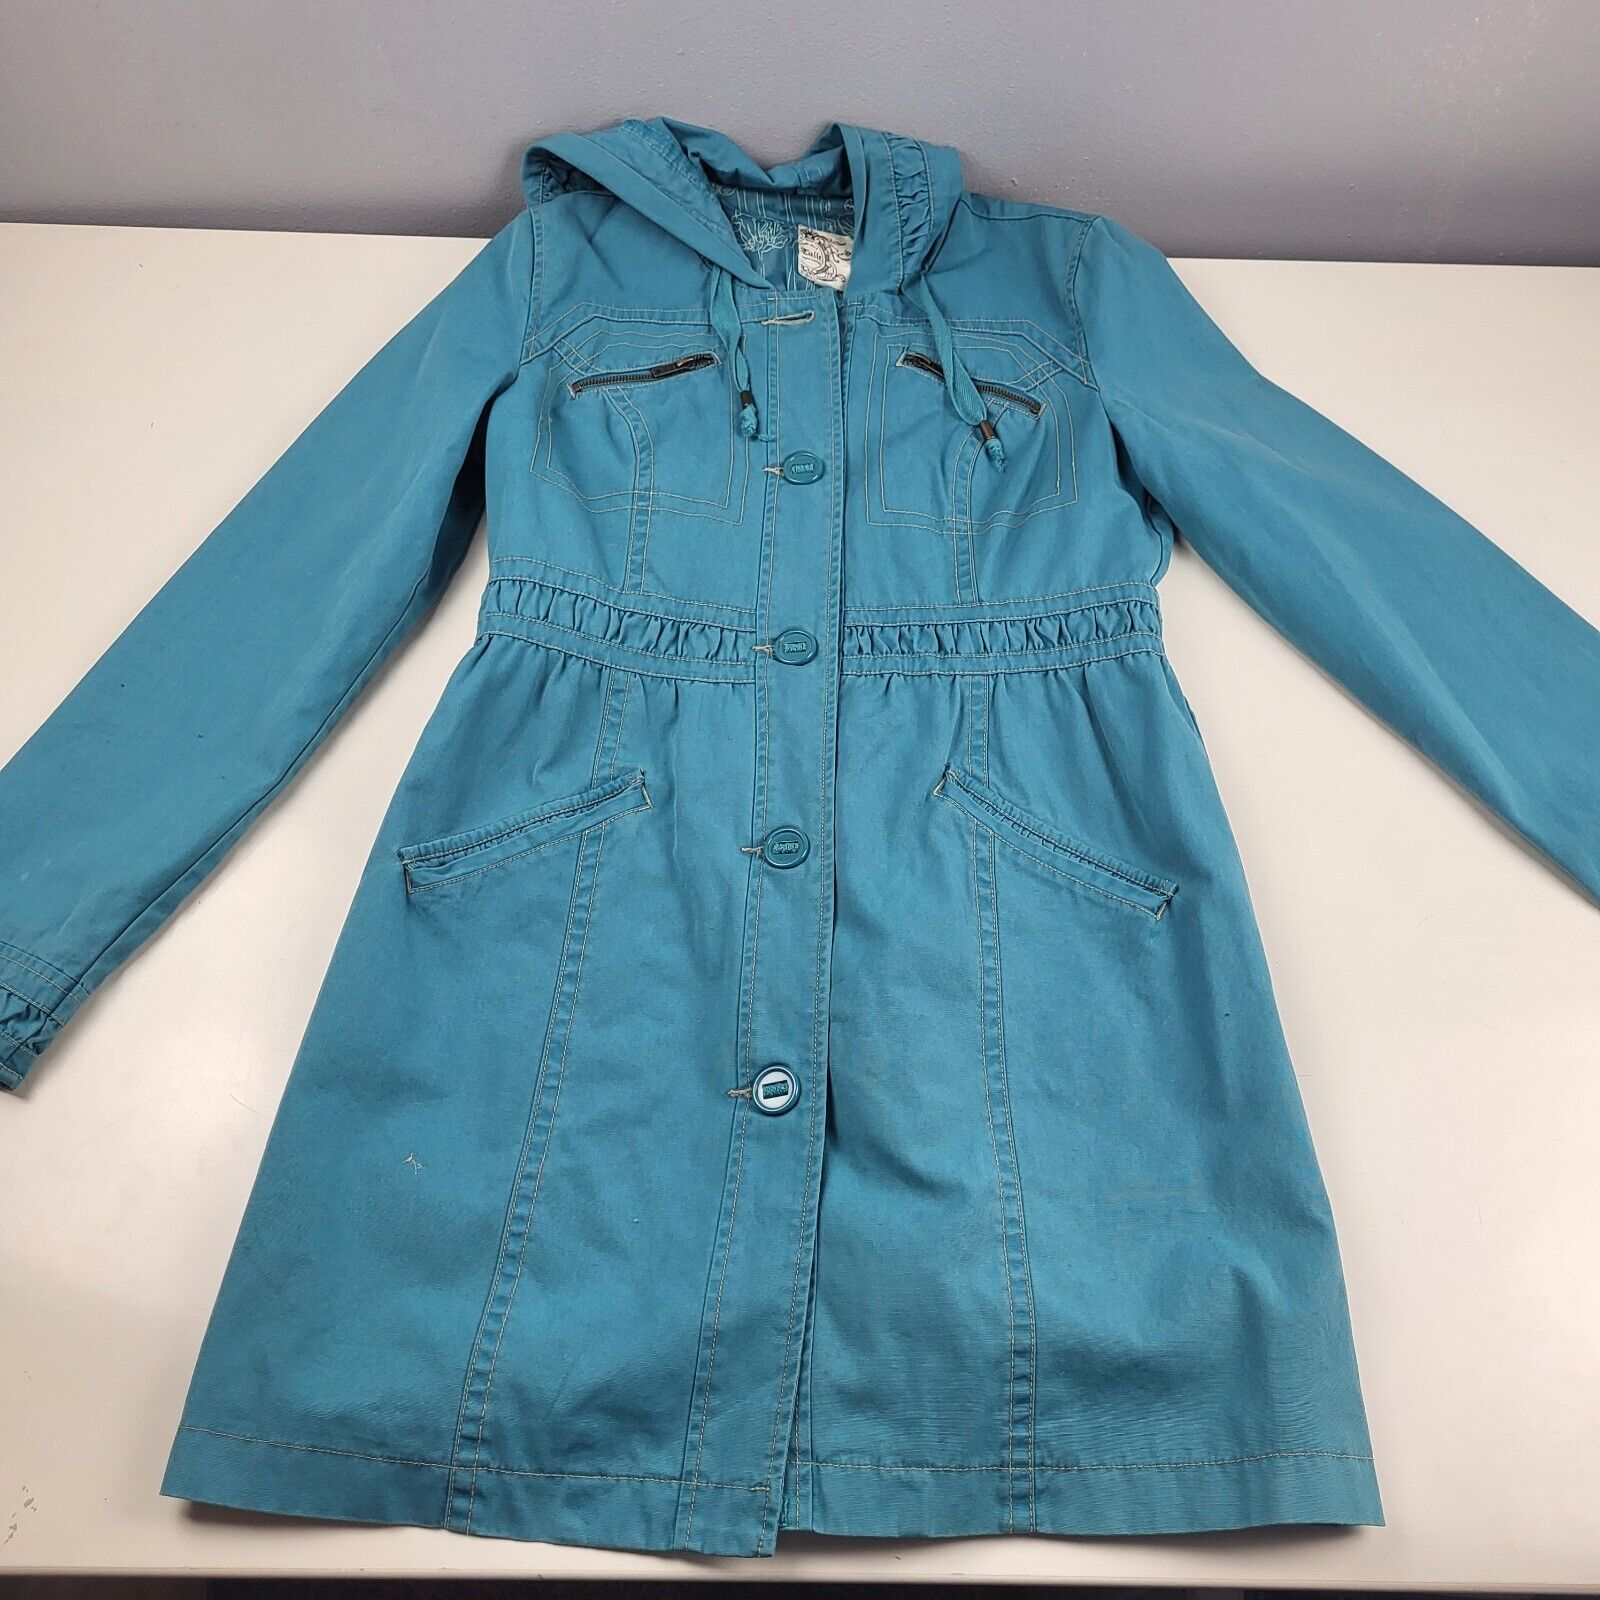 Anthropologie Tulle Jacket Women's Medium Teal 100% Cotton Hooded Long Button Up